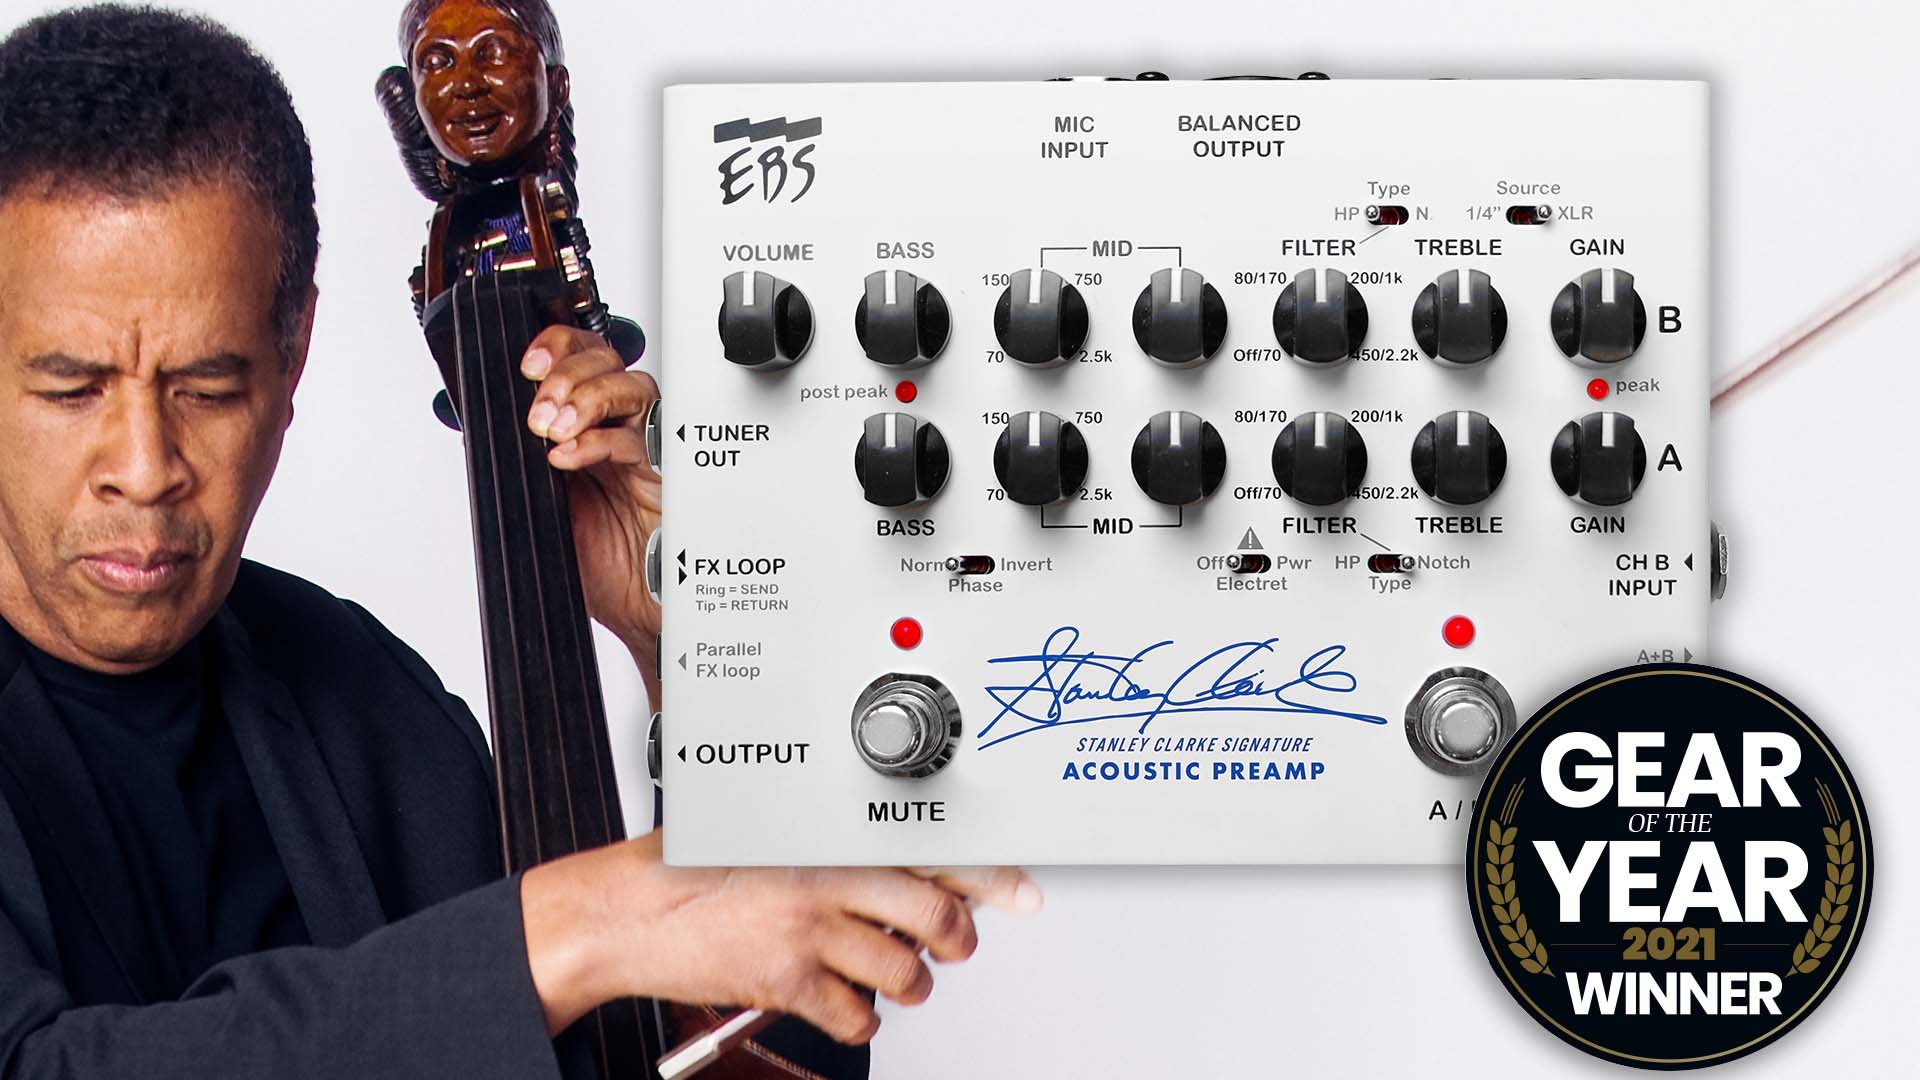 Gear Of the Year award for the EBS Stanley Clarke Preamp! — Algam